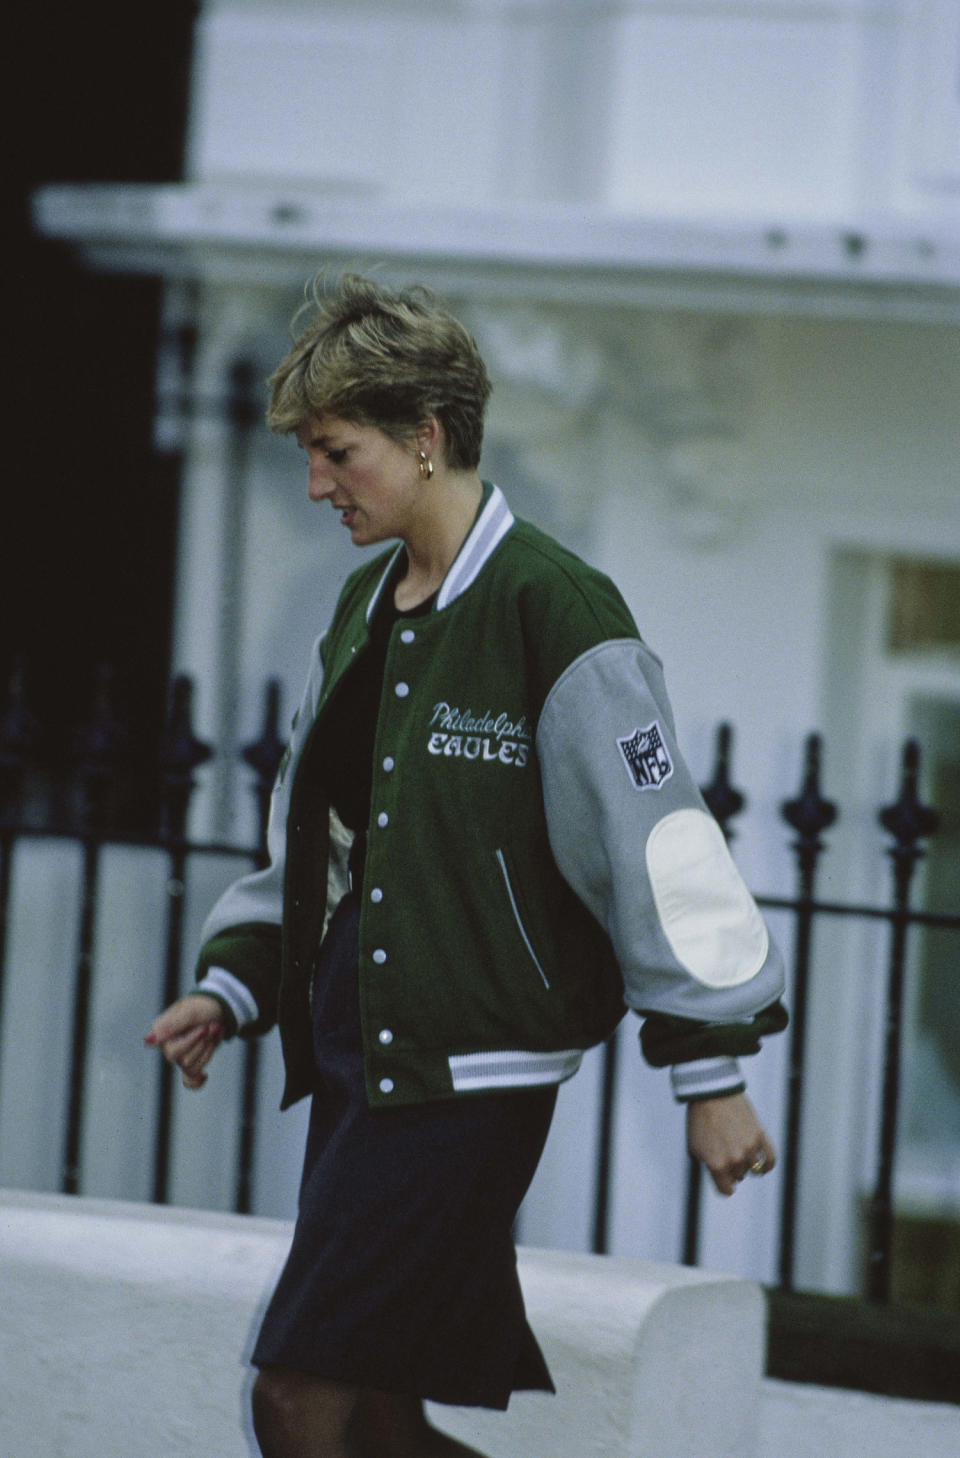 Diana At Wetherby School (Jayne Fincher / Princess Diana Archive/Getty Images)